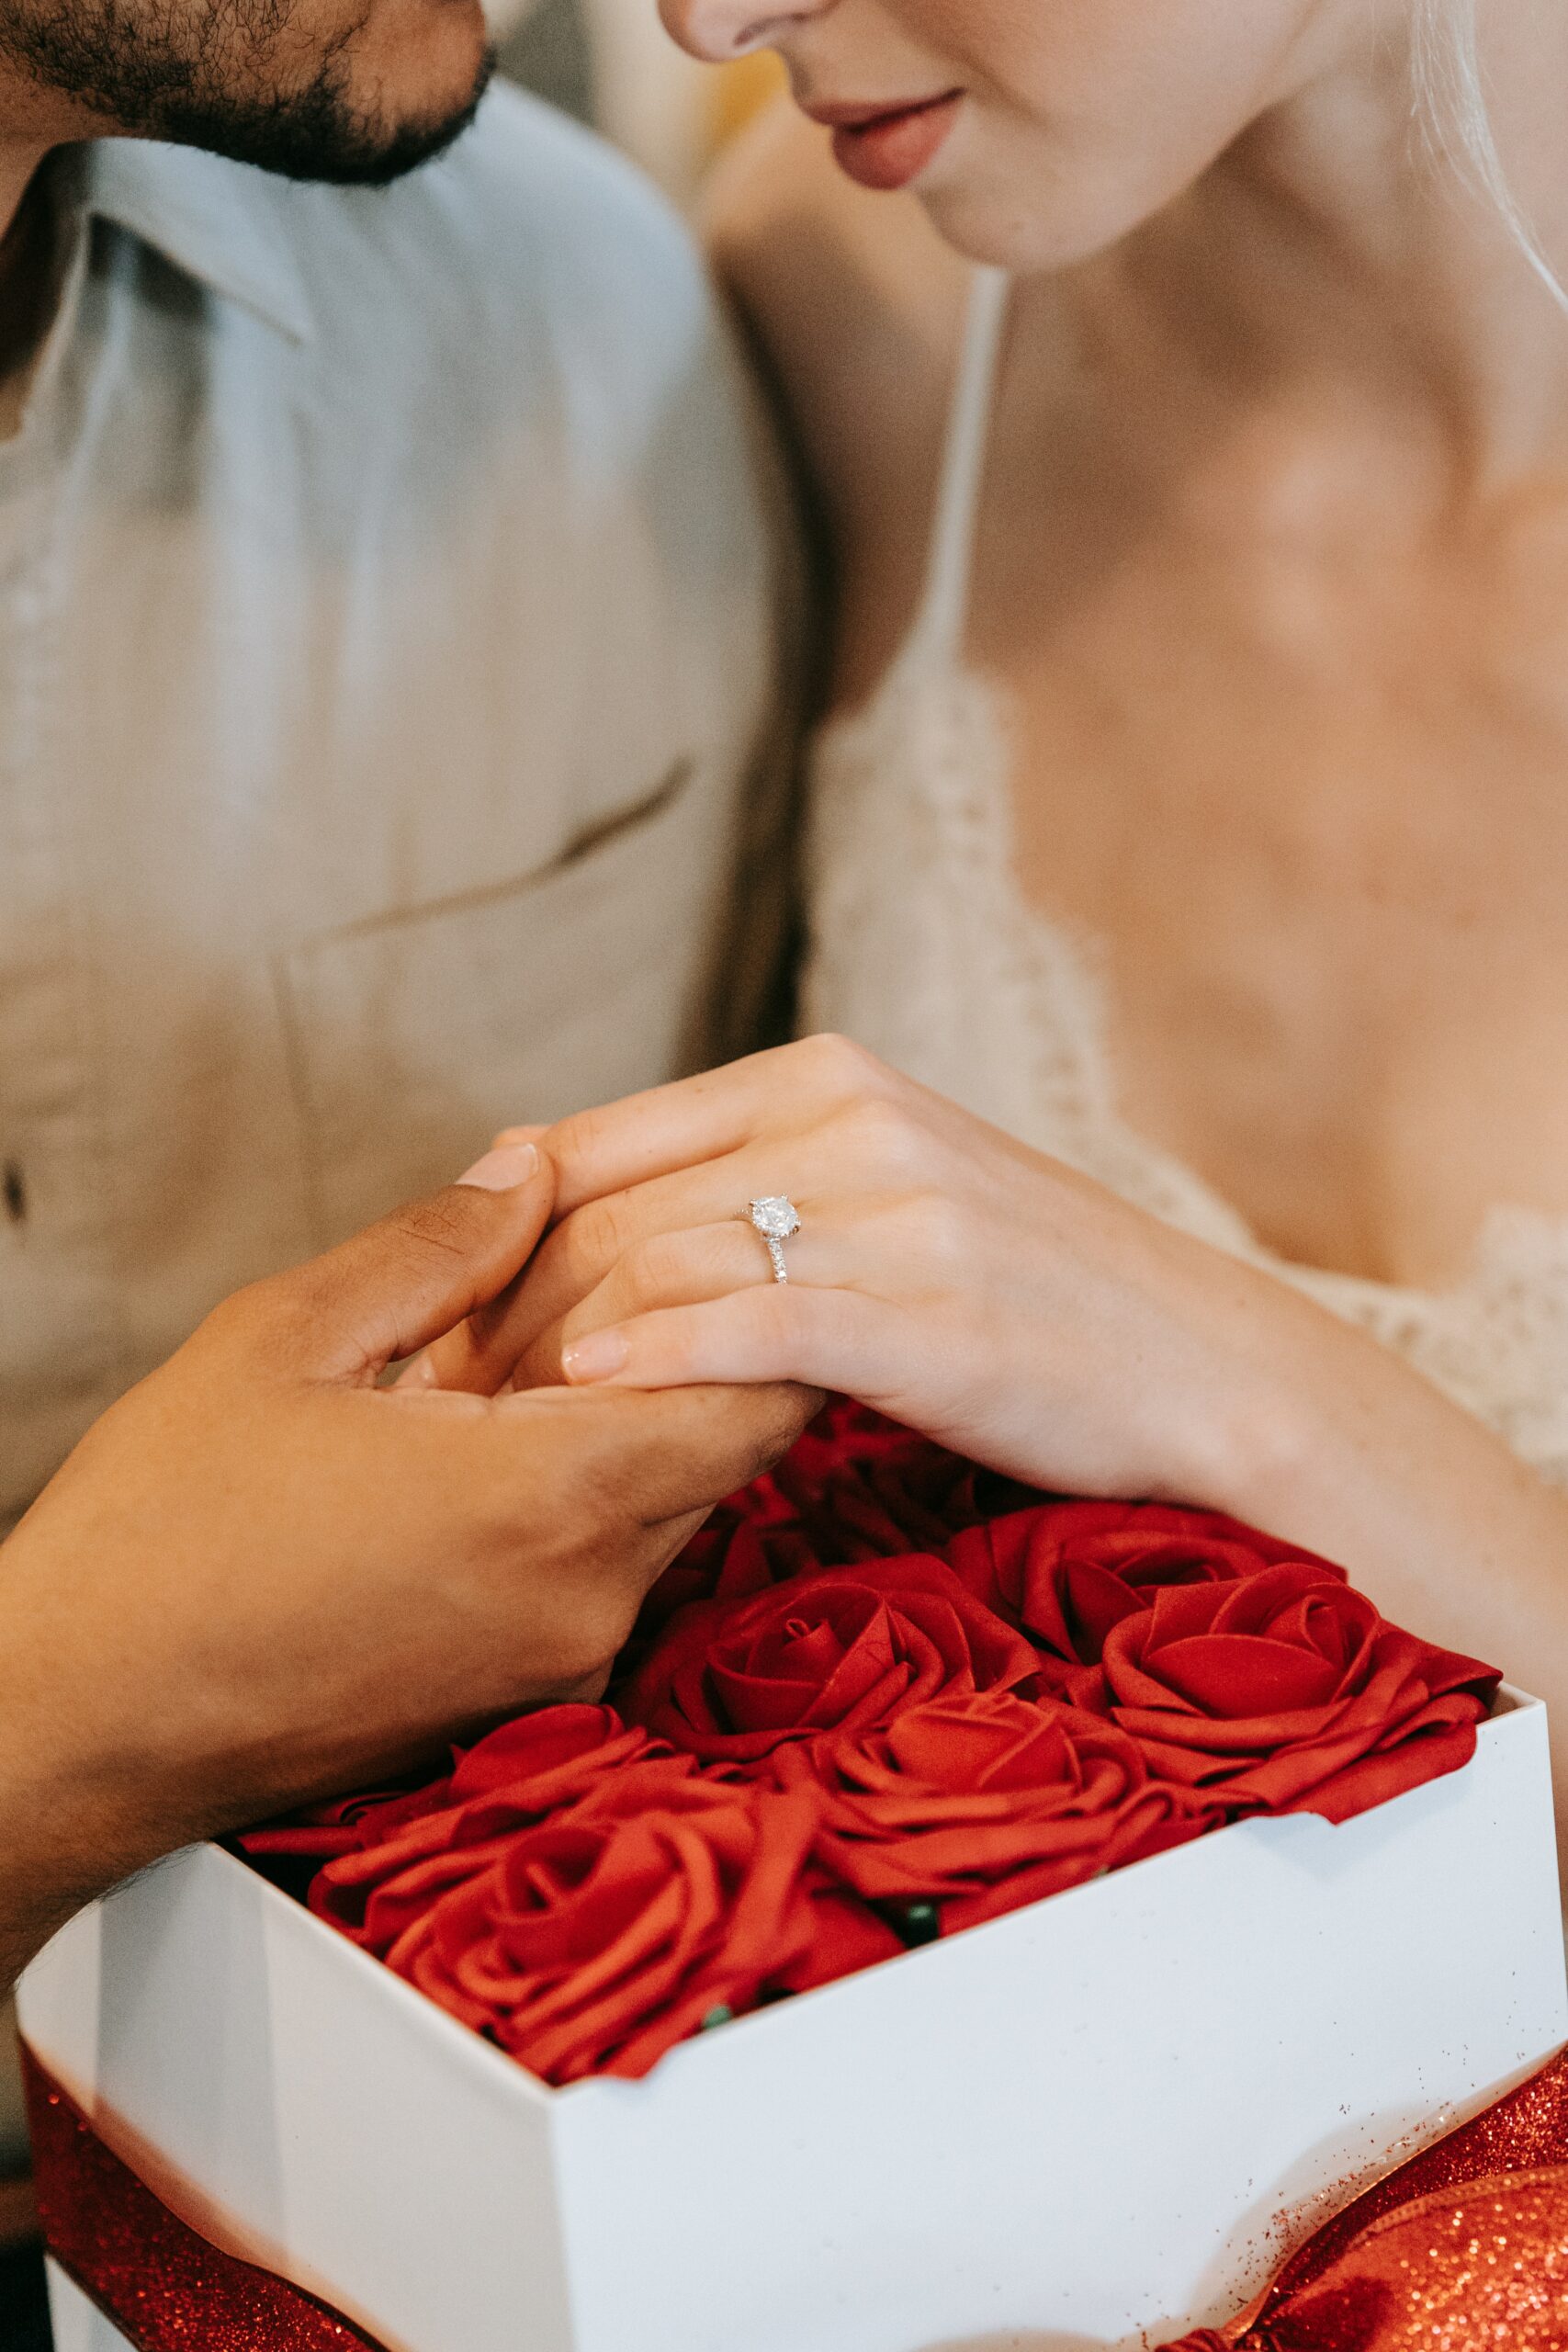 How to Find the Perfect Engagement Ring to Match Your Wedding Vision